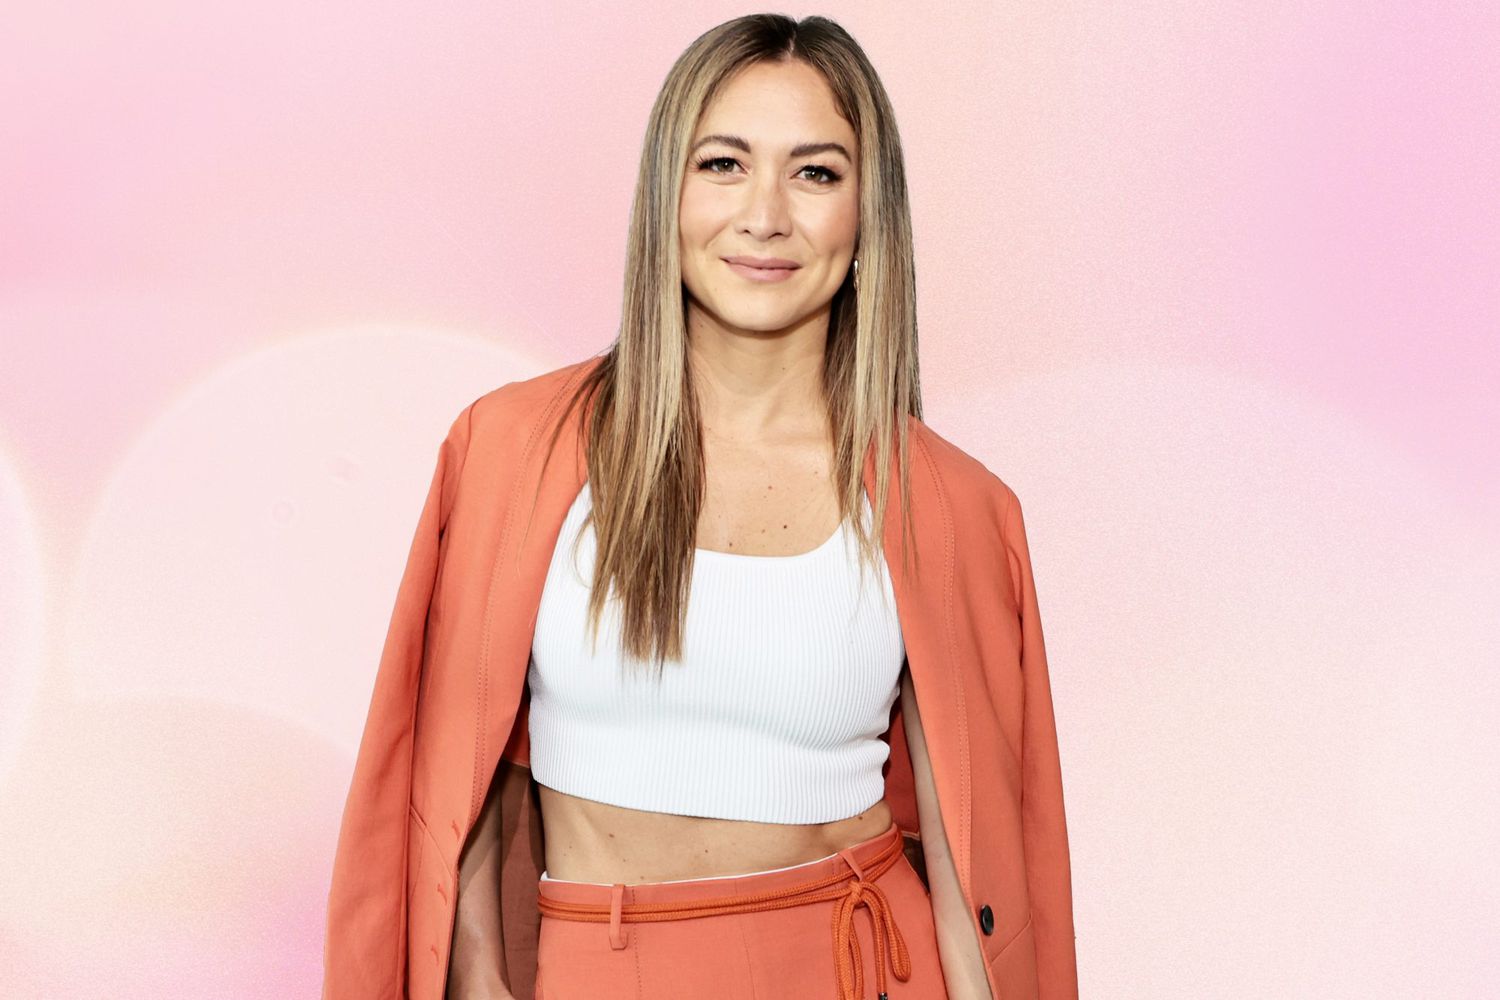 Emma Lovewell wearing a peach blazer and pant against a pink background